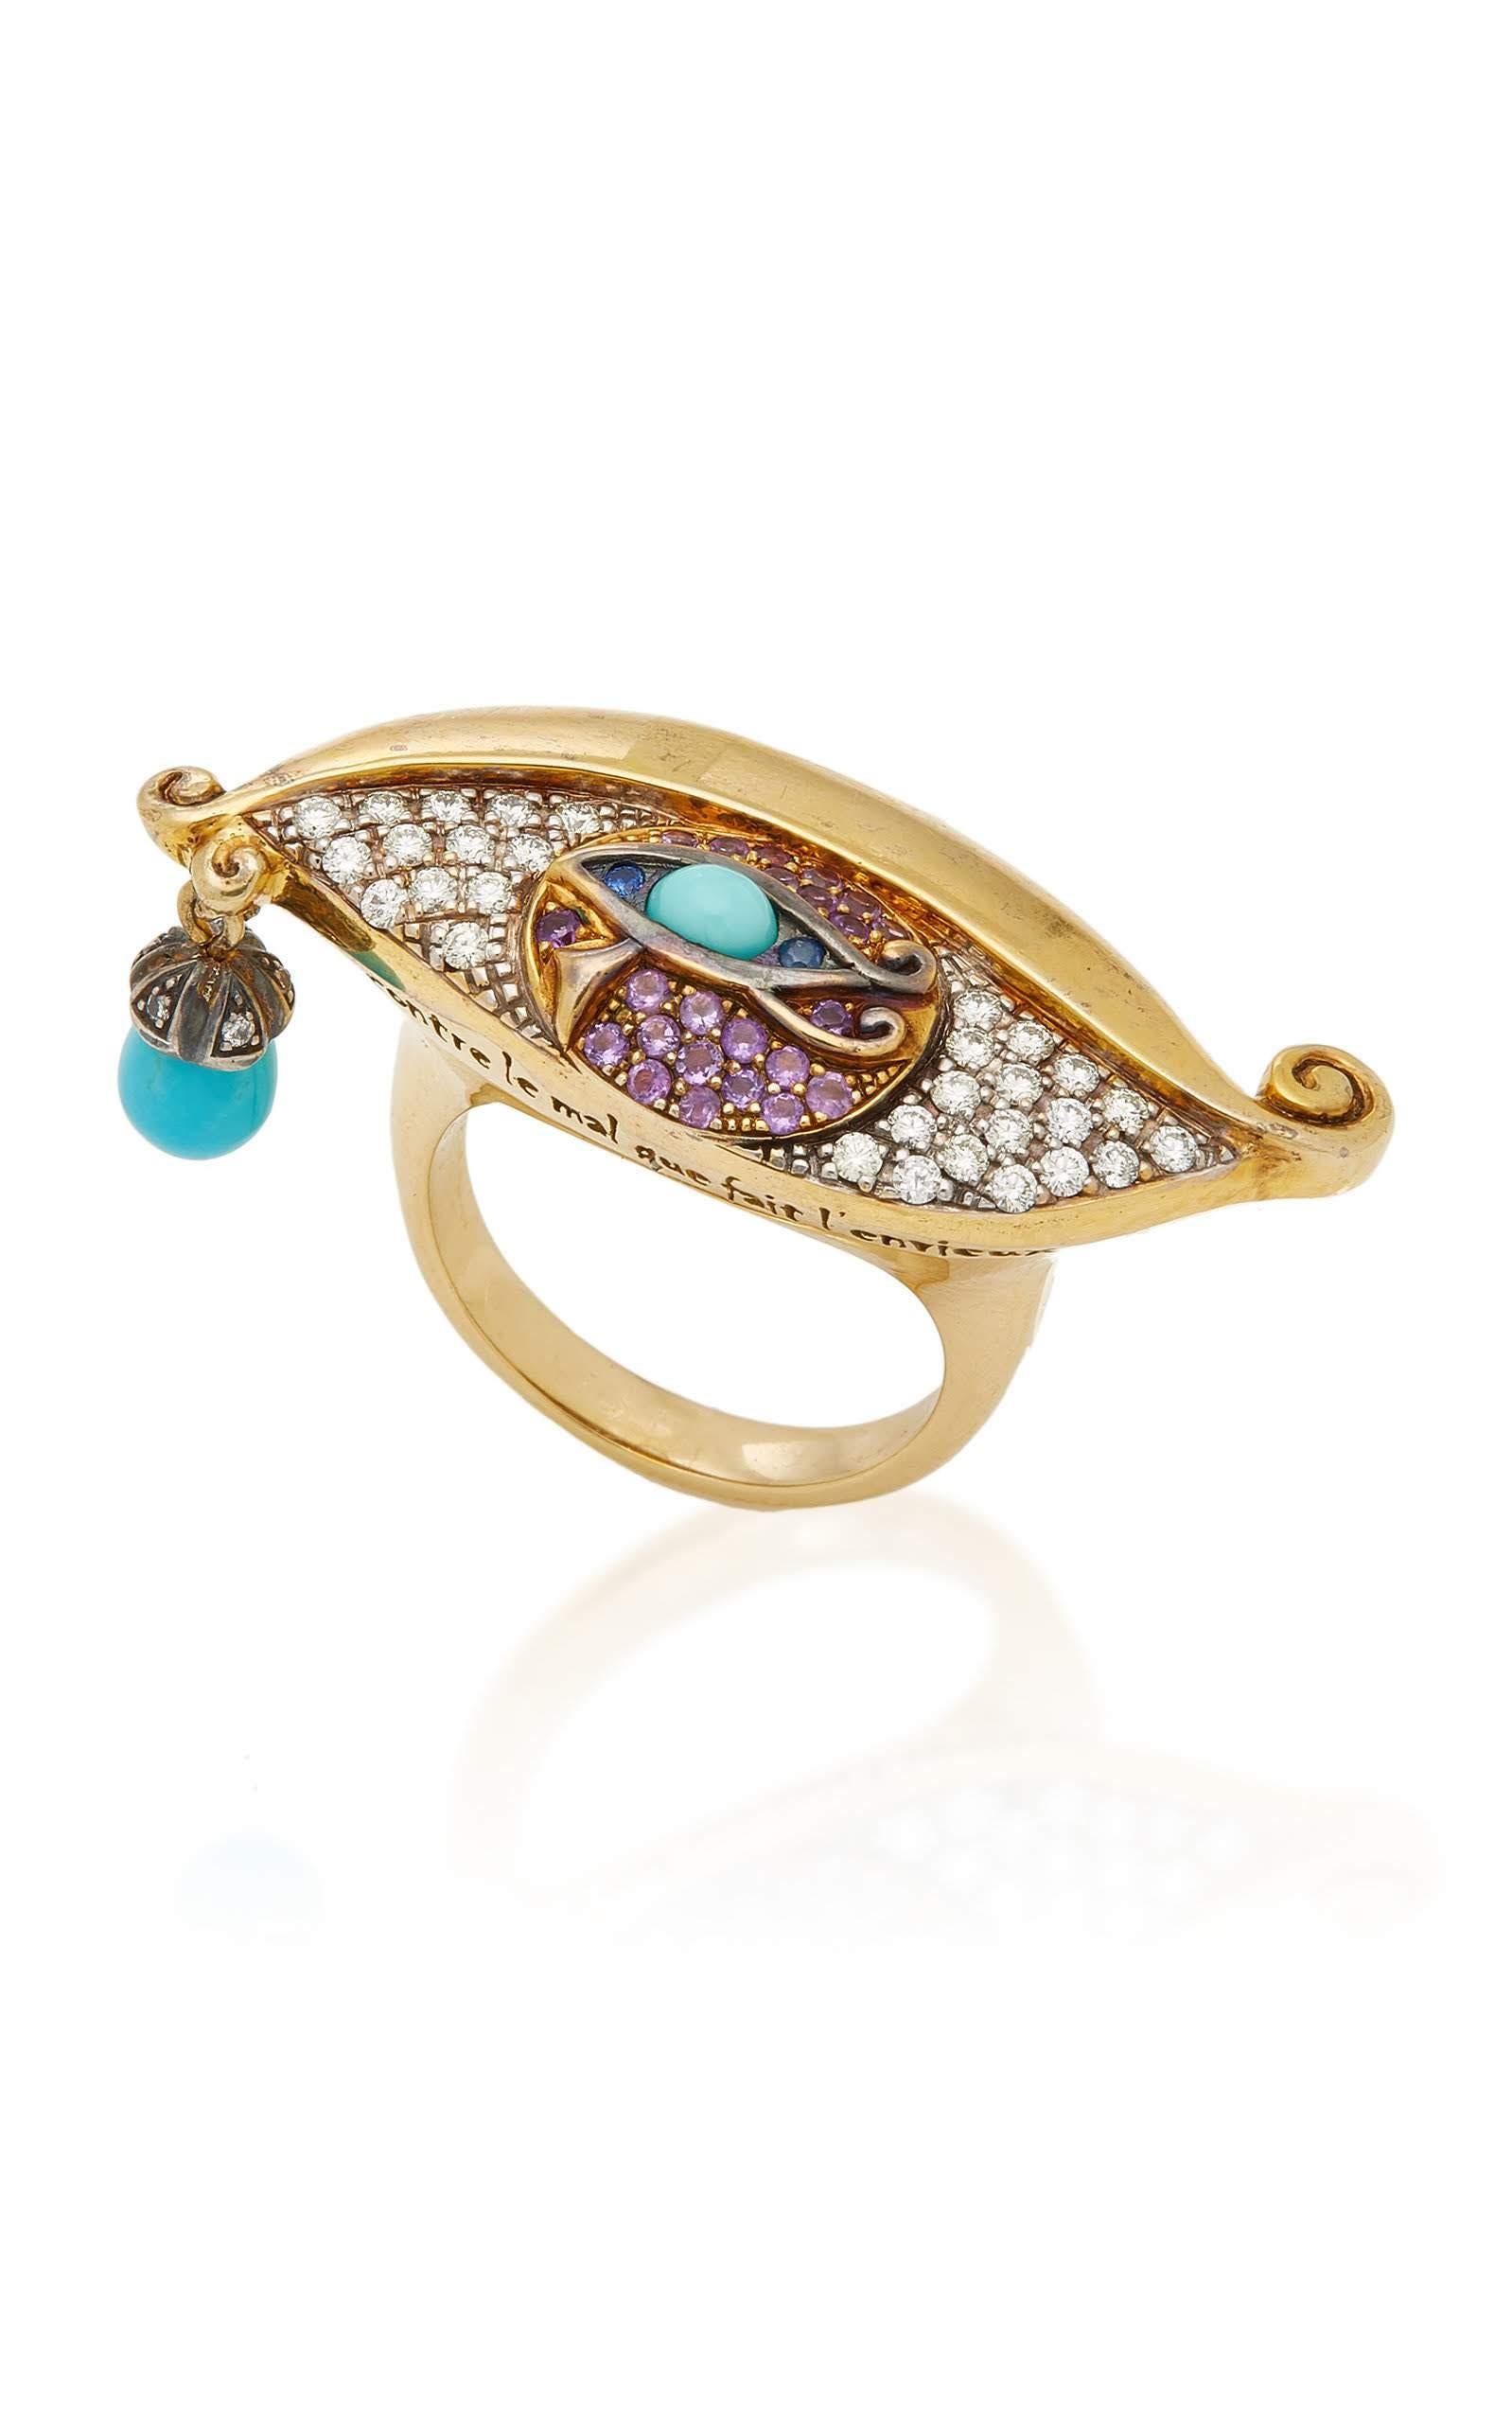 Egyptian Revival Sylvie Corbelin Eye Of Horus Ring in Gold and Silver with Diamonds 